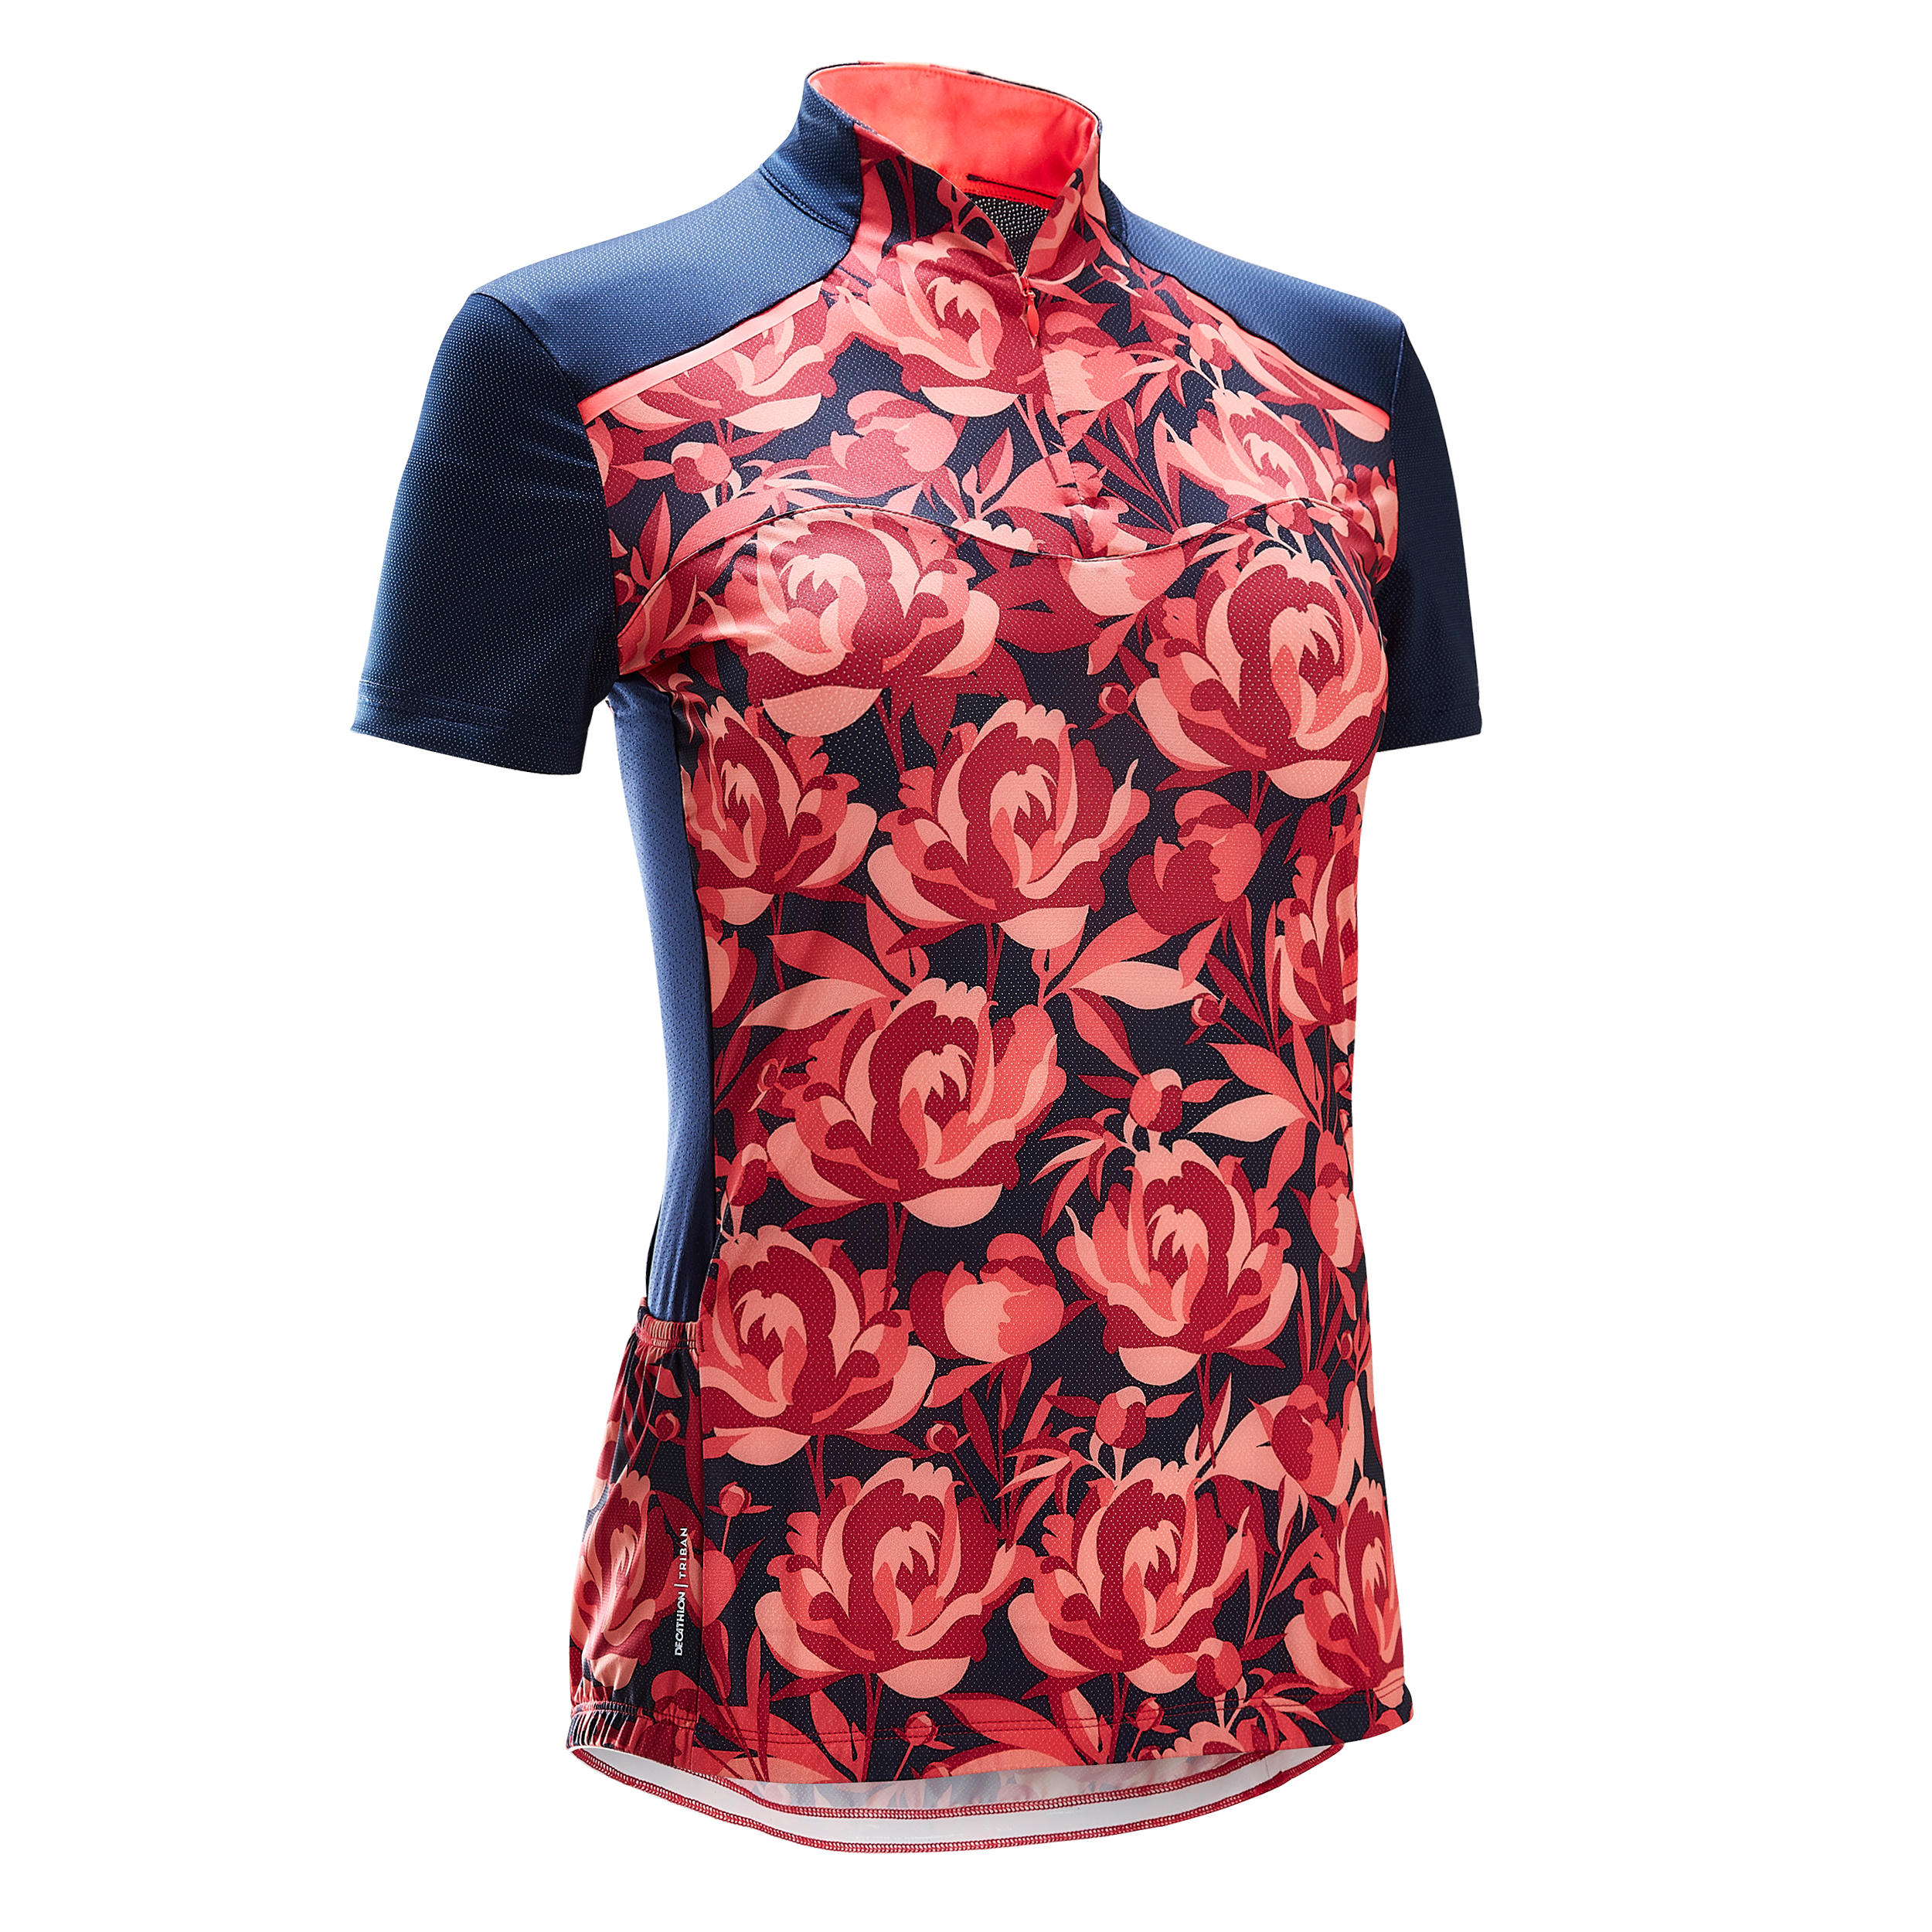 TRIBAN Women's Short-Sleeved Cycling Jersey 500 - Floral Pink